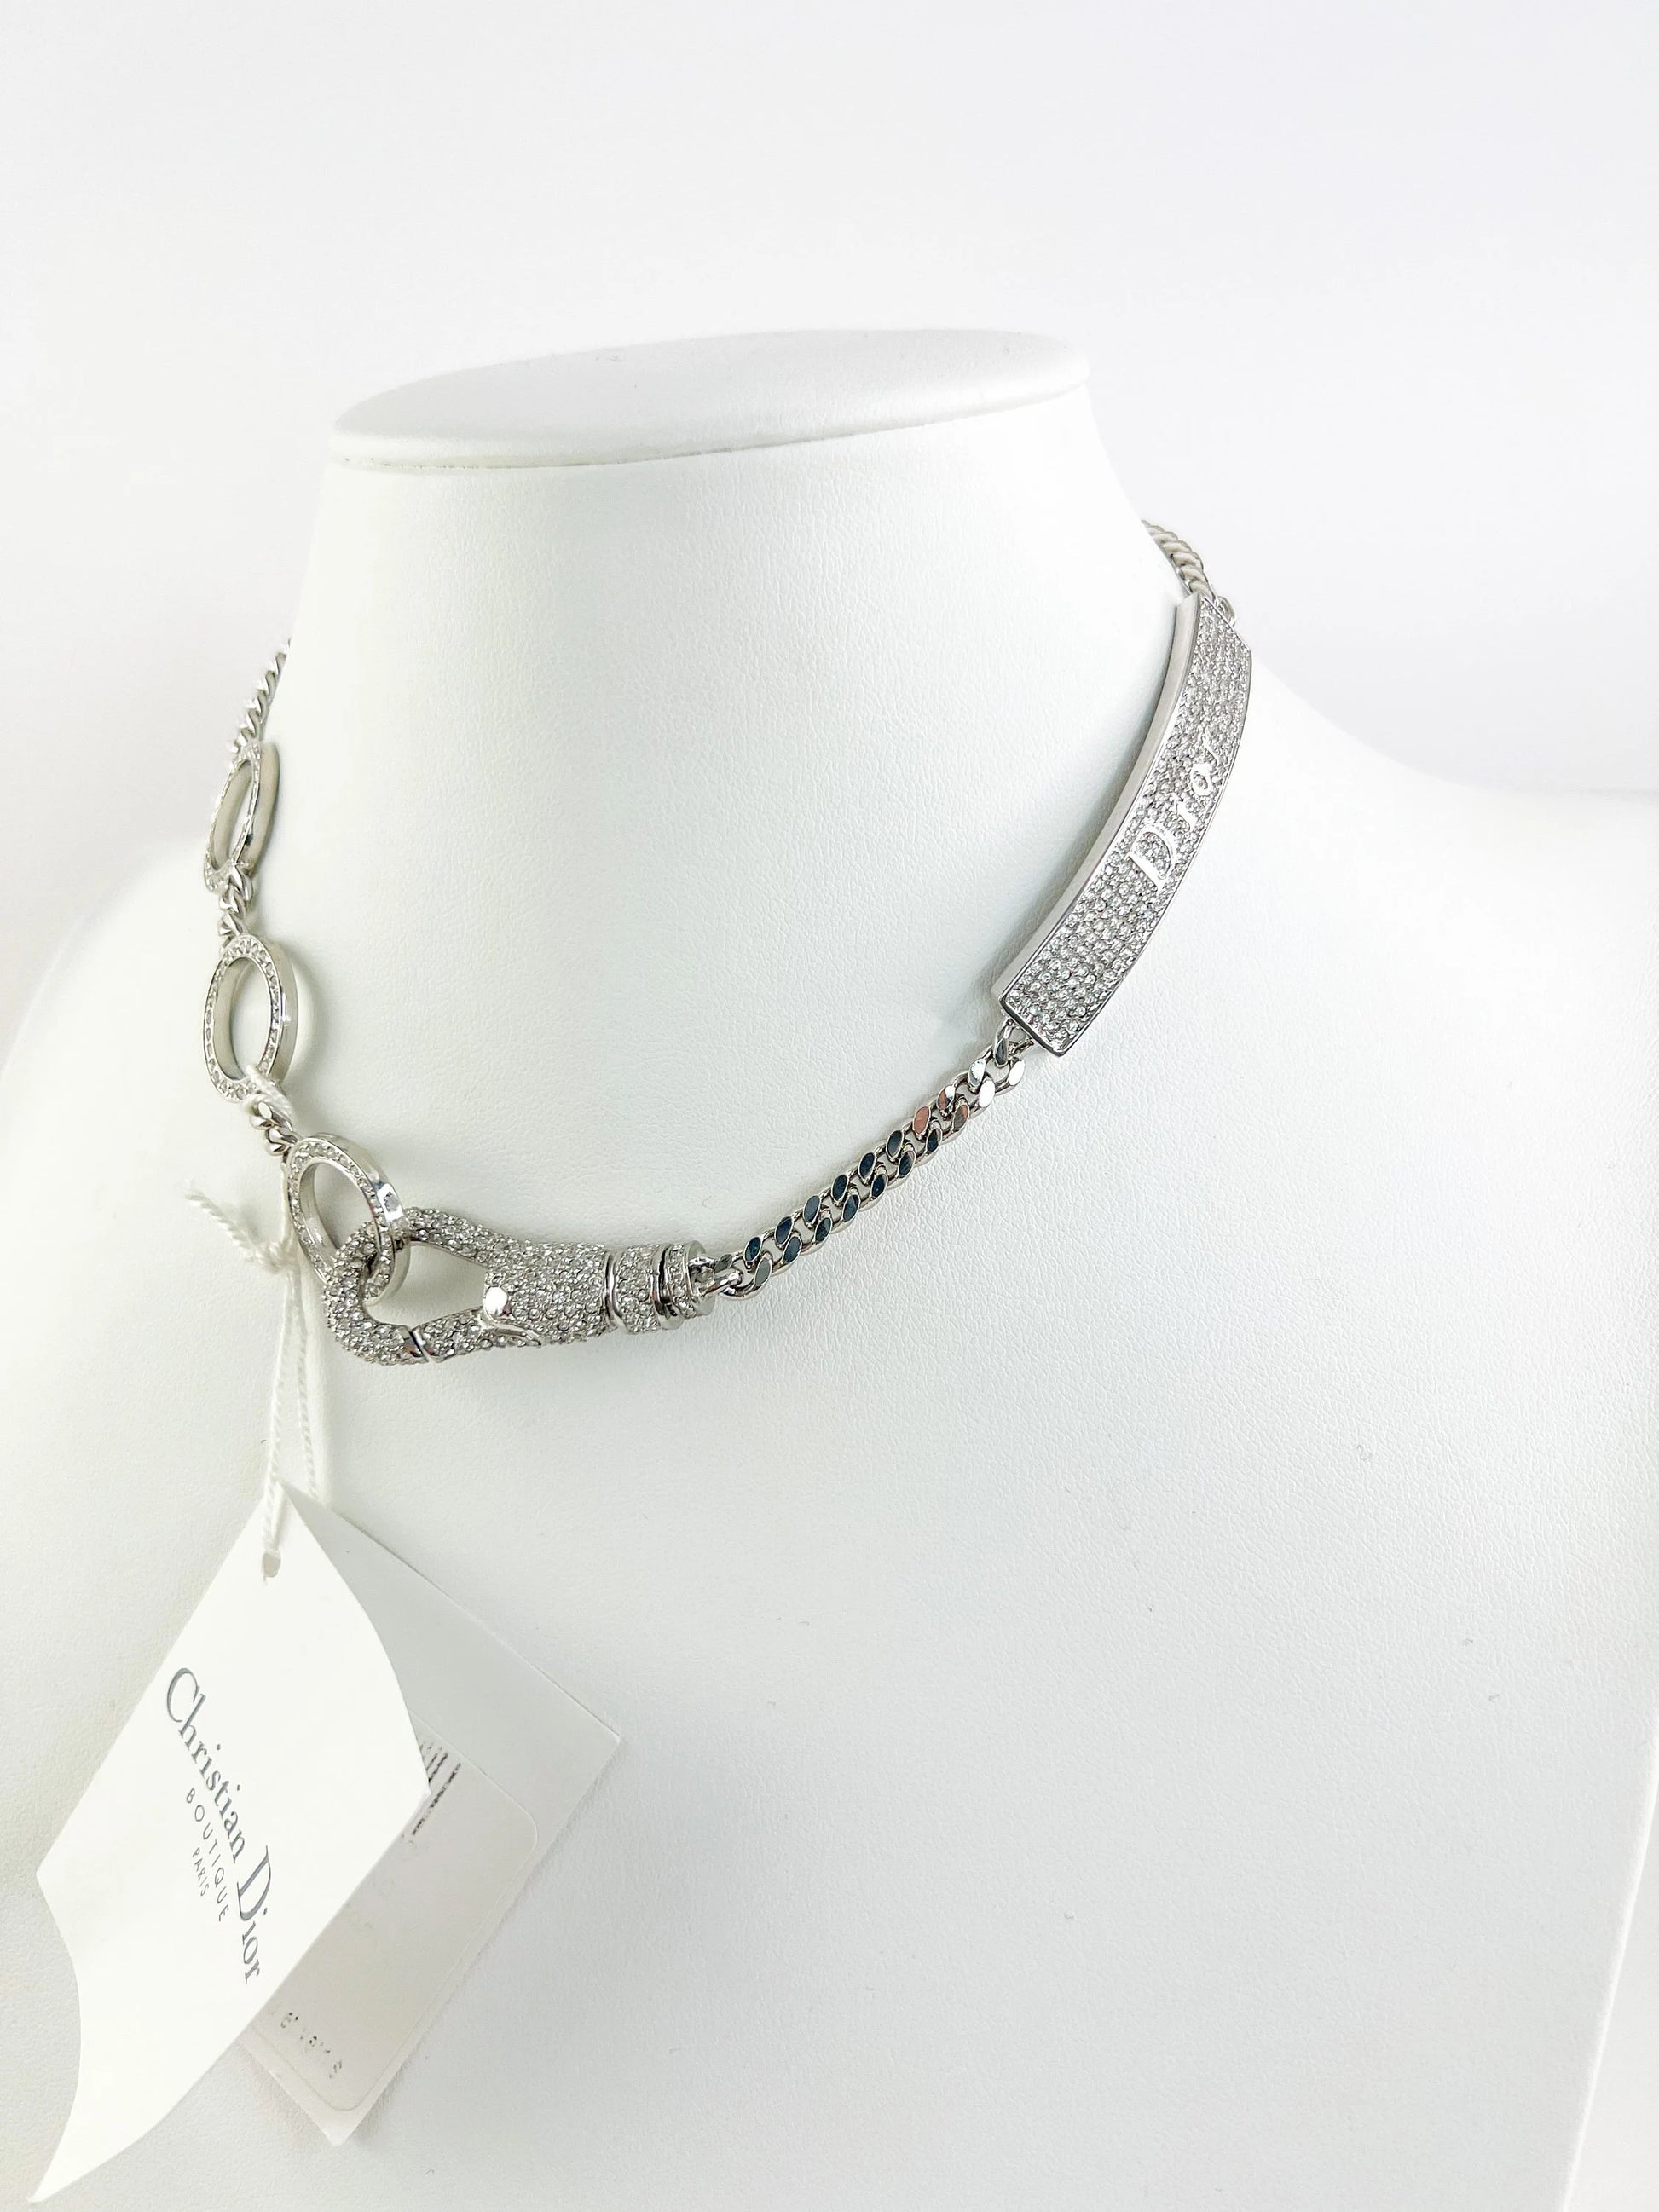 Vintage Christian Dior HARDCORE Necklace, Silver Tone Chain Necklace, Rare JOHN GALLIANO, Vintage Costume Jewelry, Jewelry for women